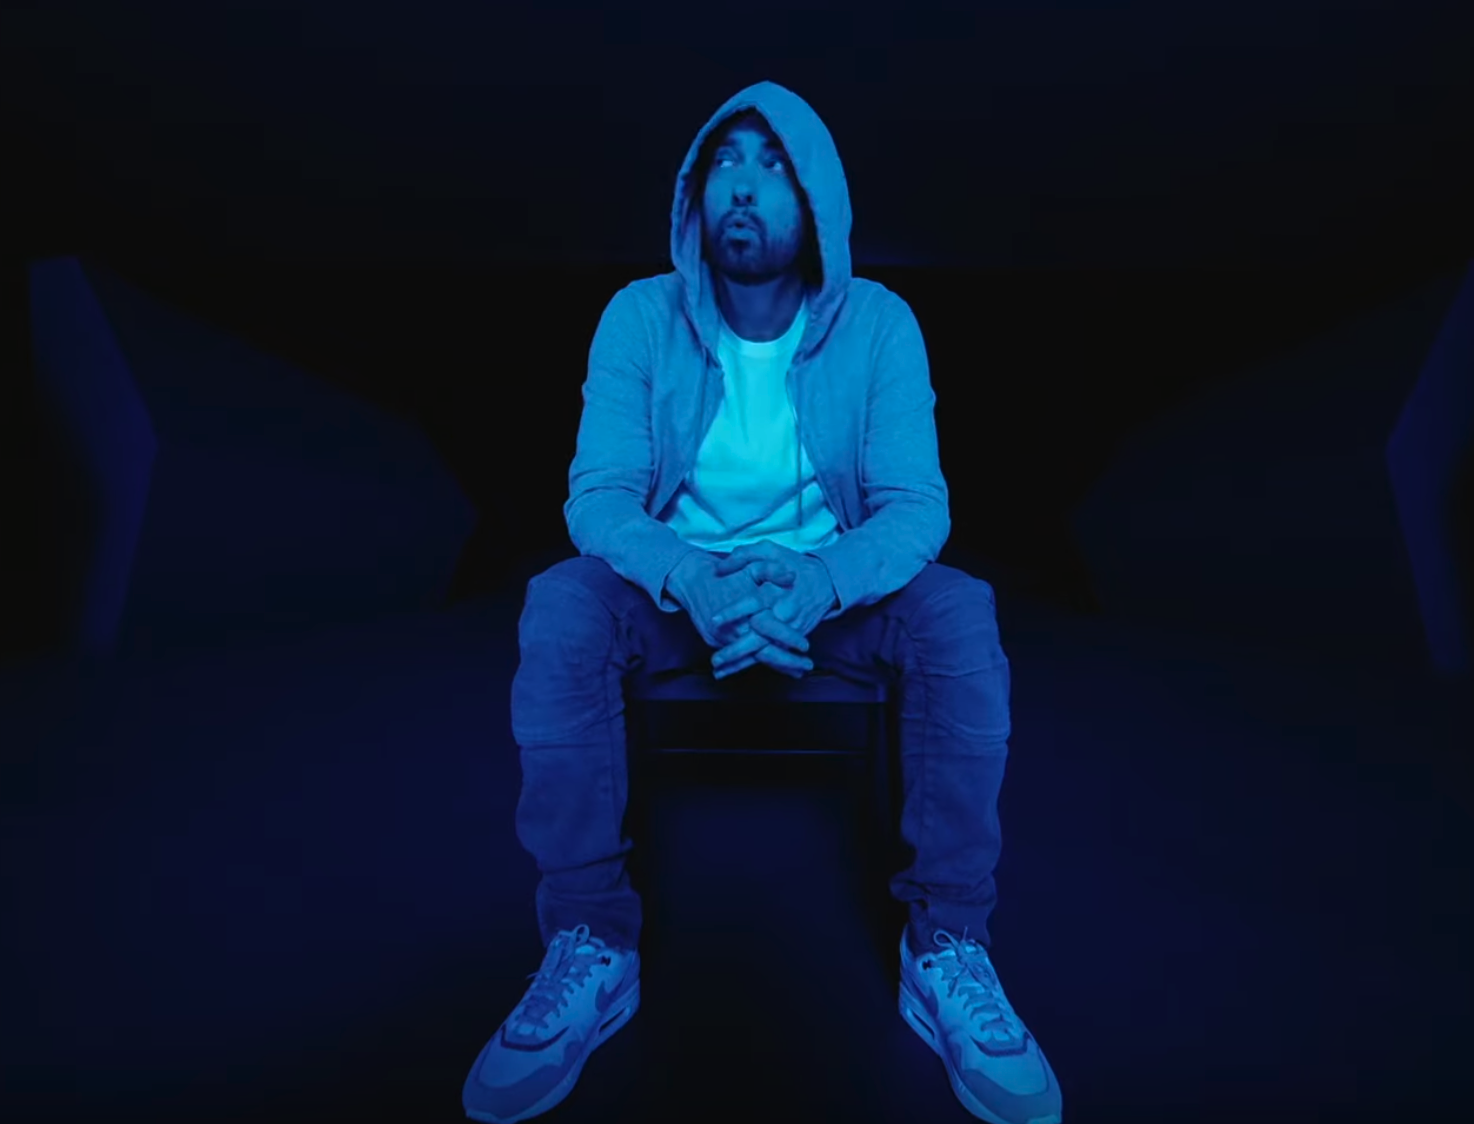 Eminem is back with another video from his latest album entitled "Music to be Murdered By." The single "Darkness" is one of the first single to be released off the new album